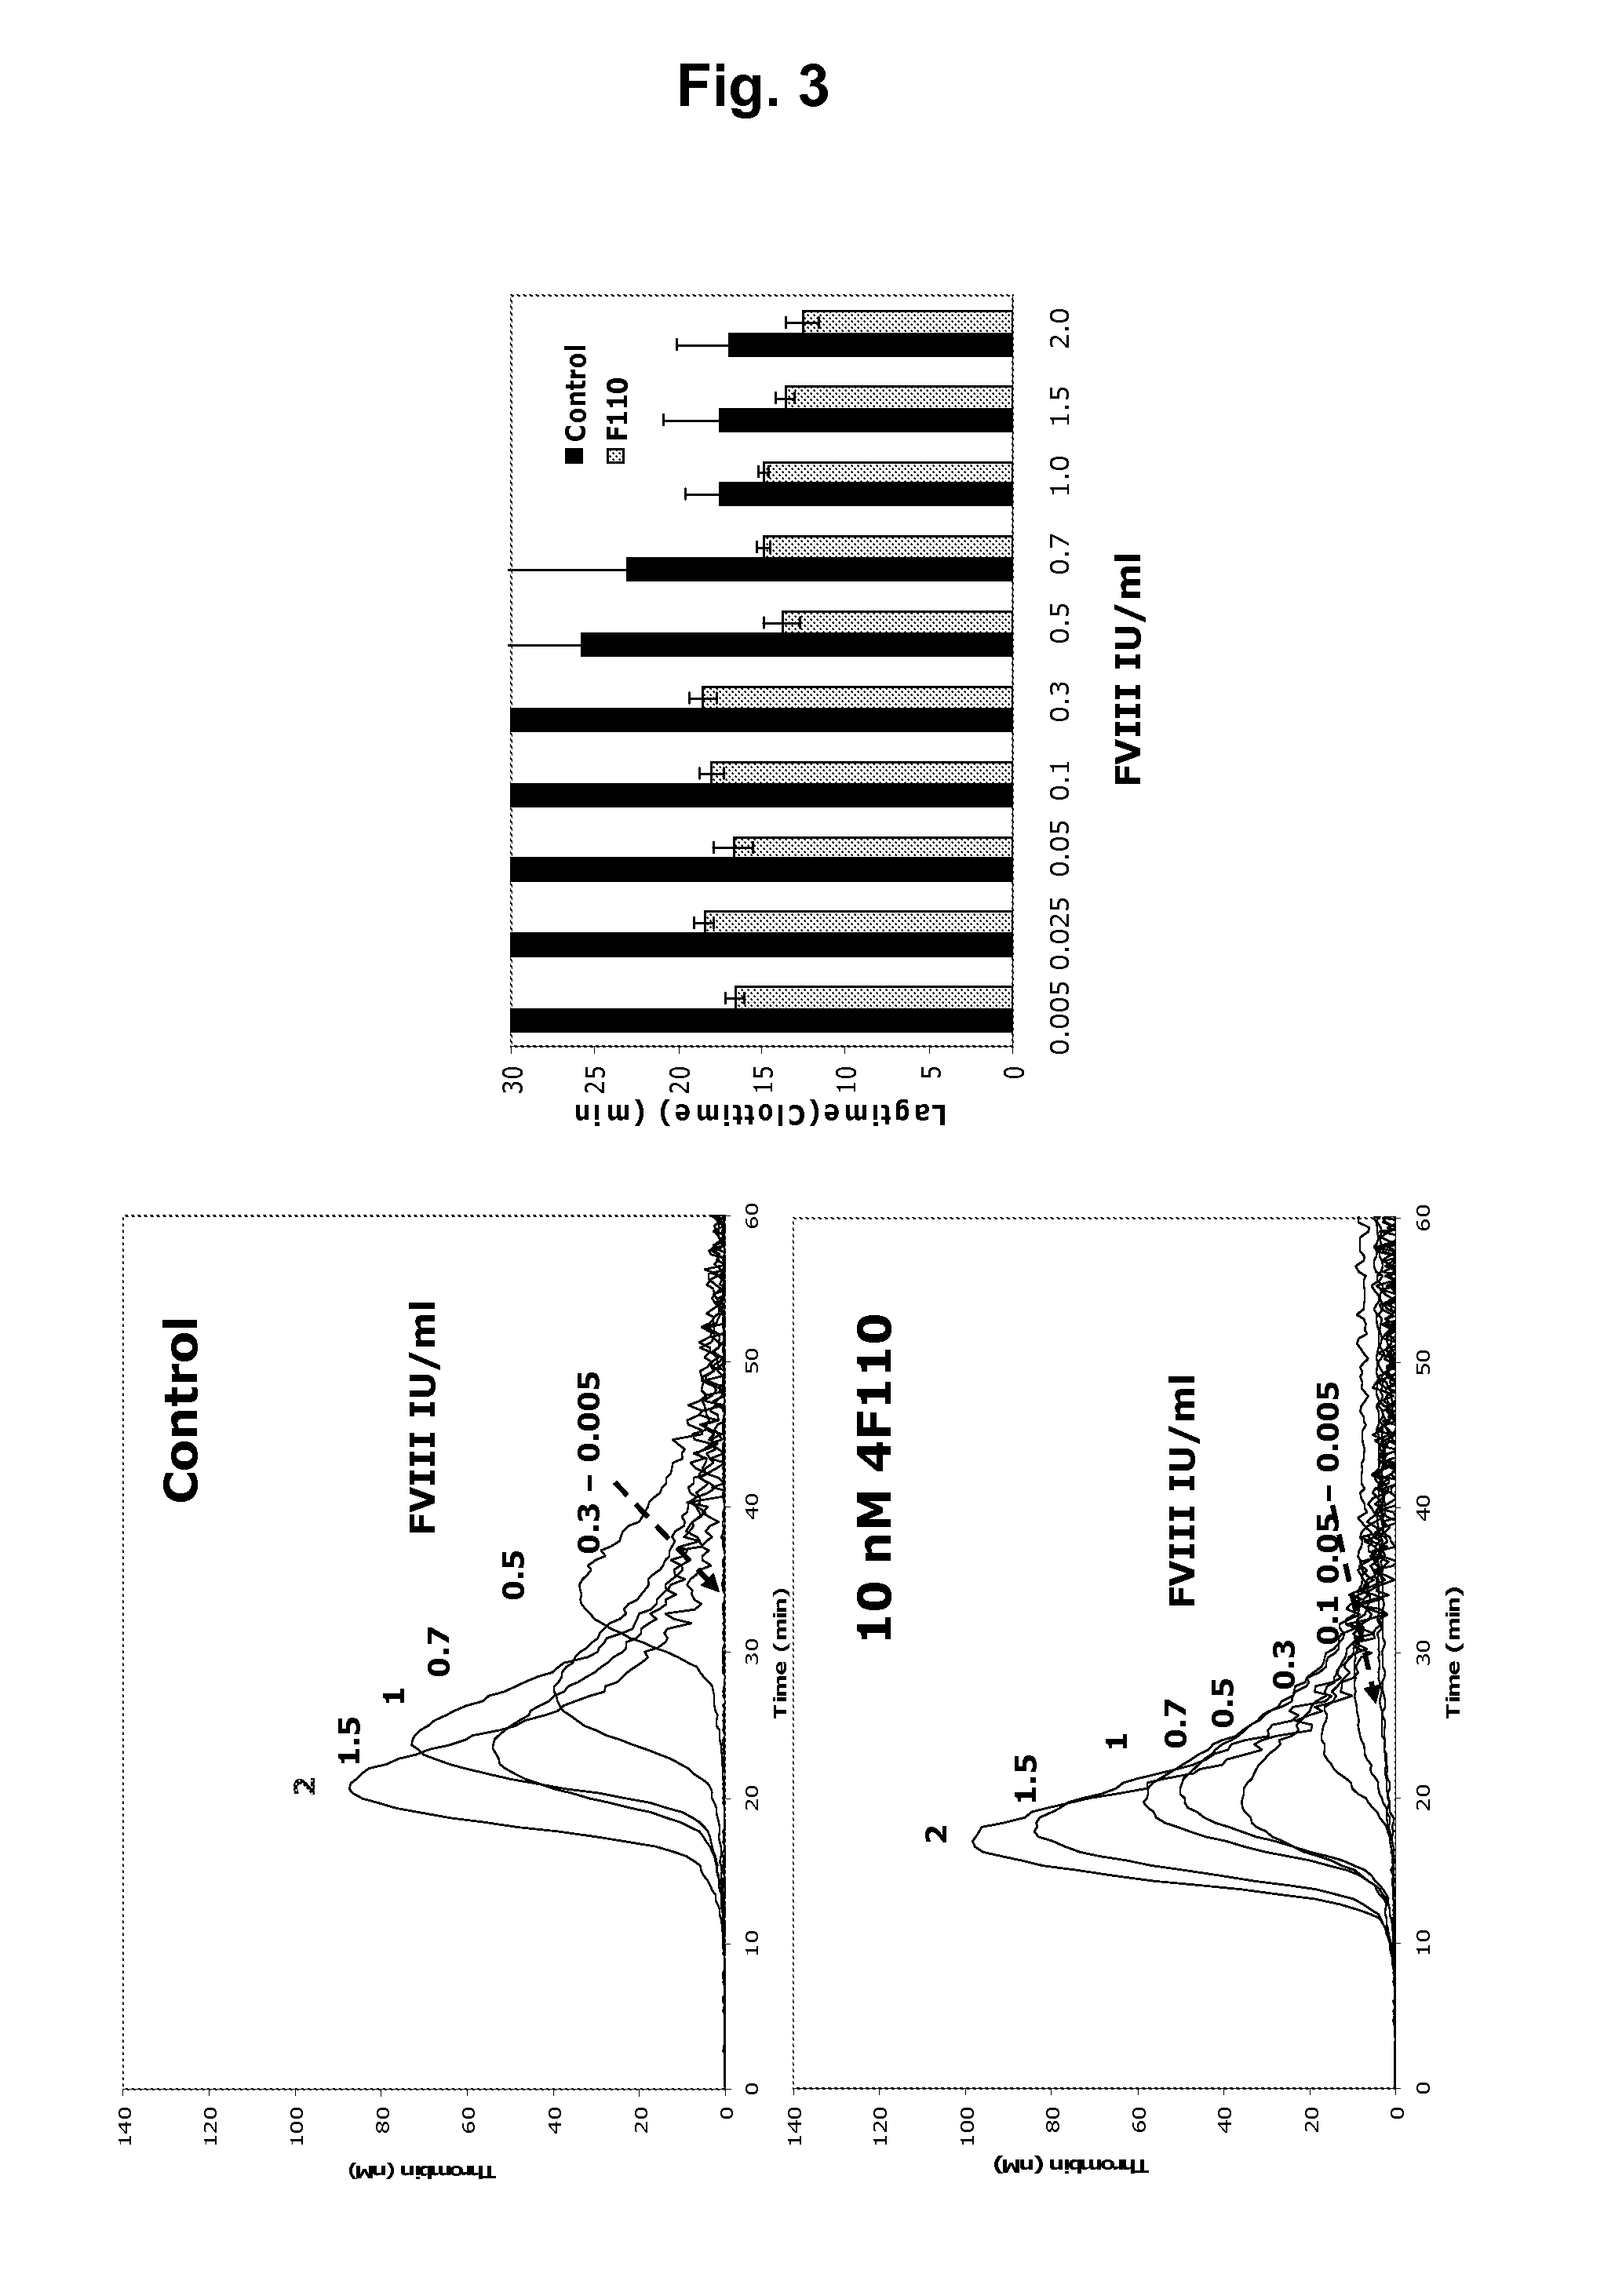 Antibodies That Are Capable of Specifically Binding Tissue Factor Pathway Inhibitor